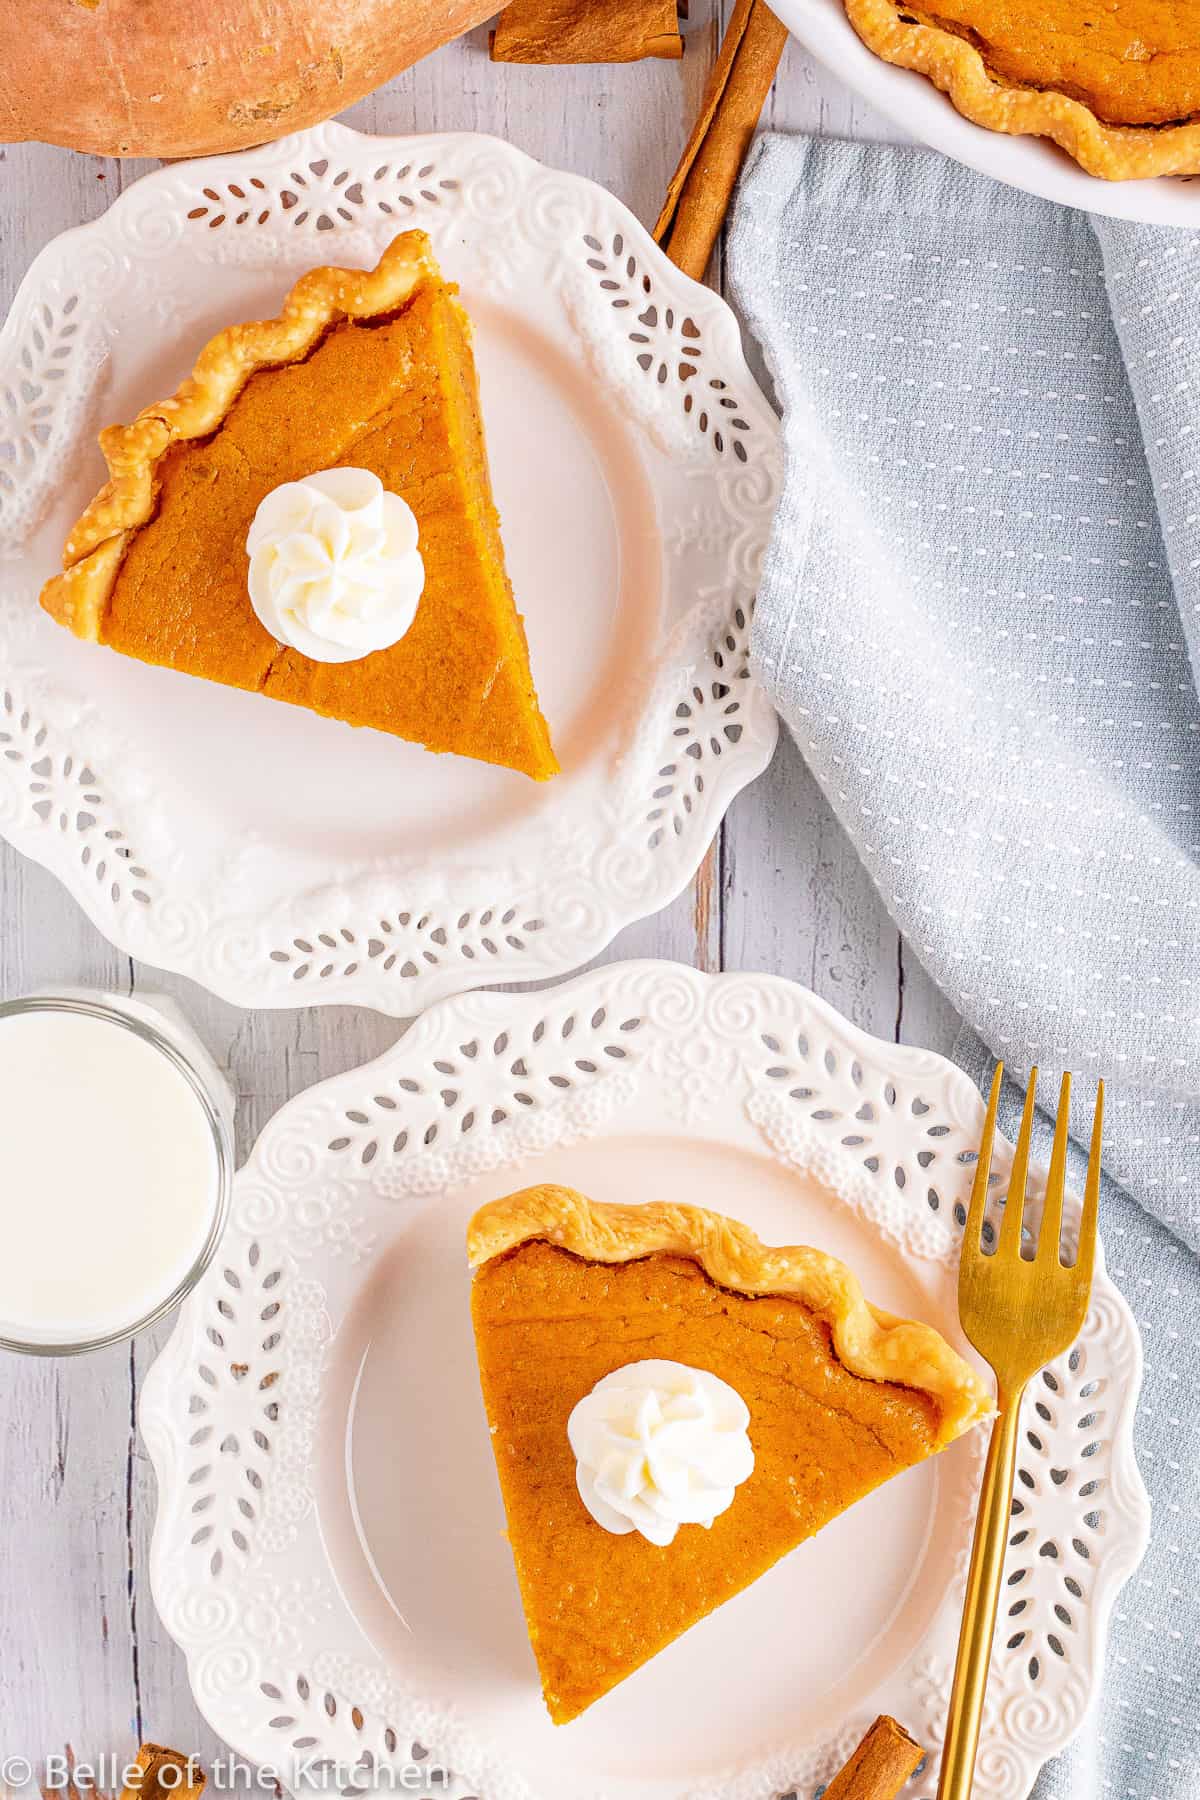 two slices of pie on plates with forks